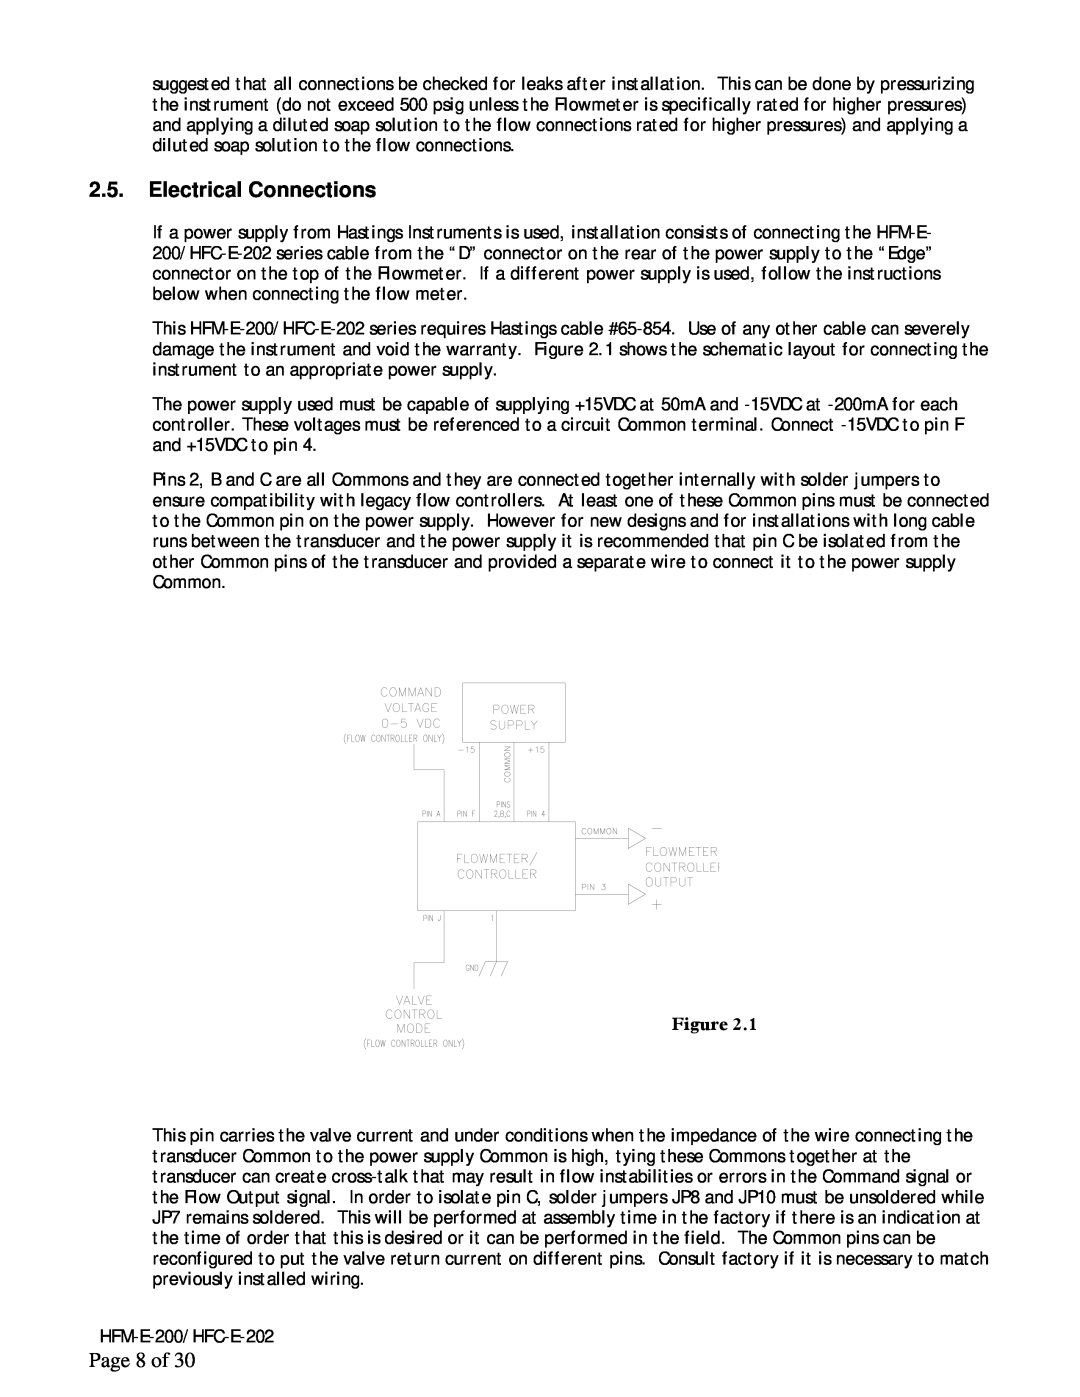 Teledyne HFC-E-202, HFM-E-200 instruction manual Electrical Connections, Page 8 of 